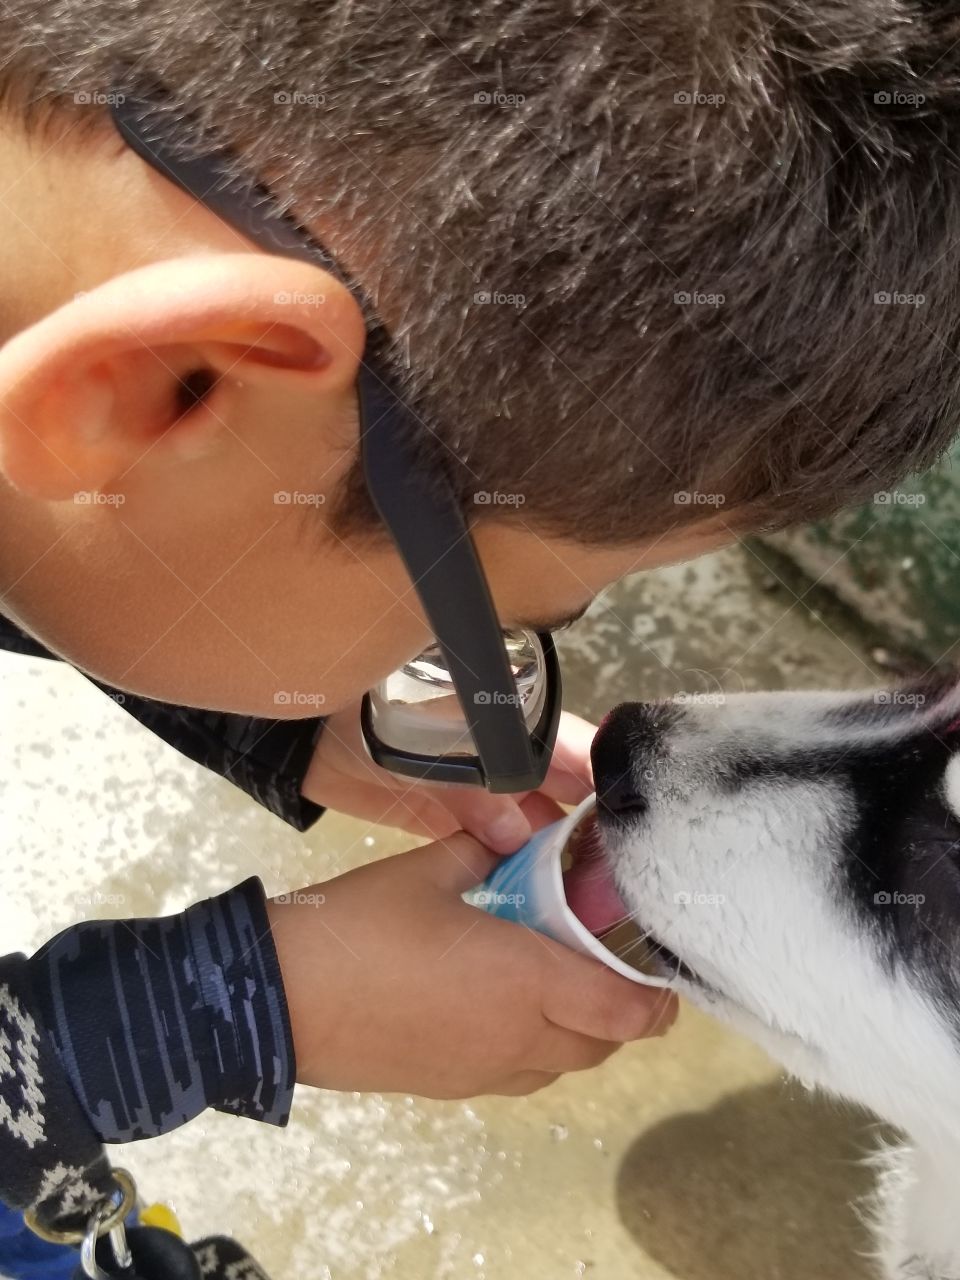 Thirsty Alaskan Malamute puppy getting a drink from a small cup from a little helpful boy at the lake park.